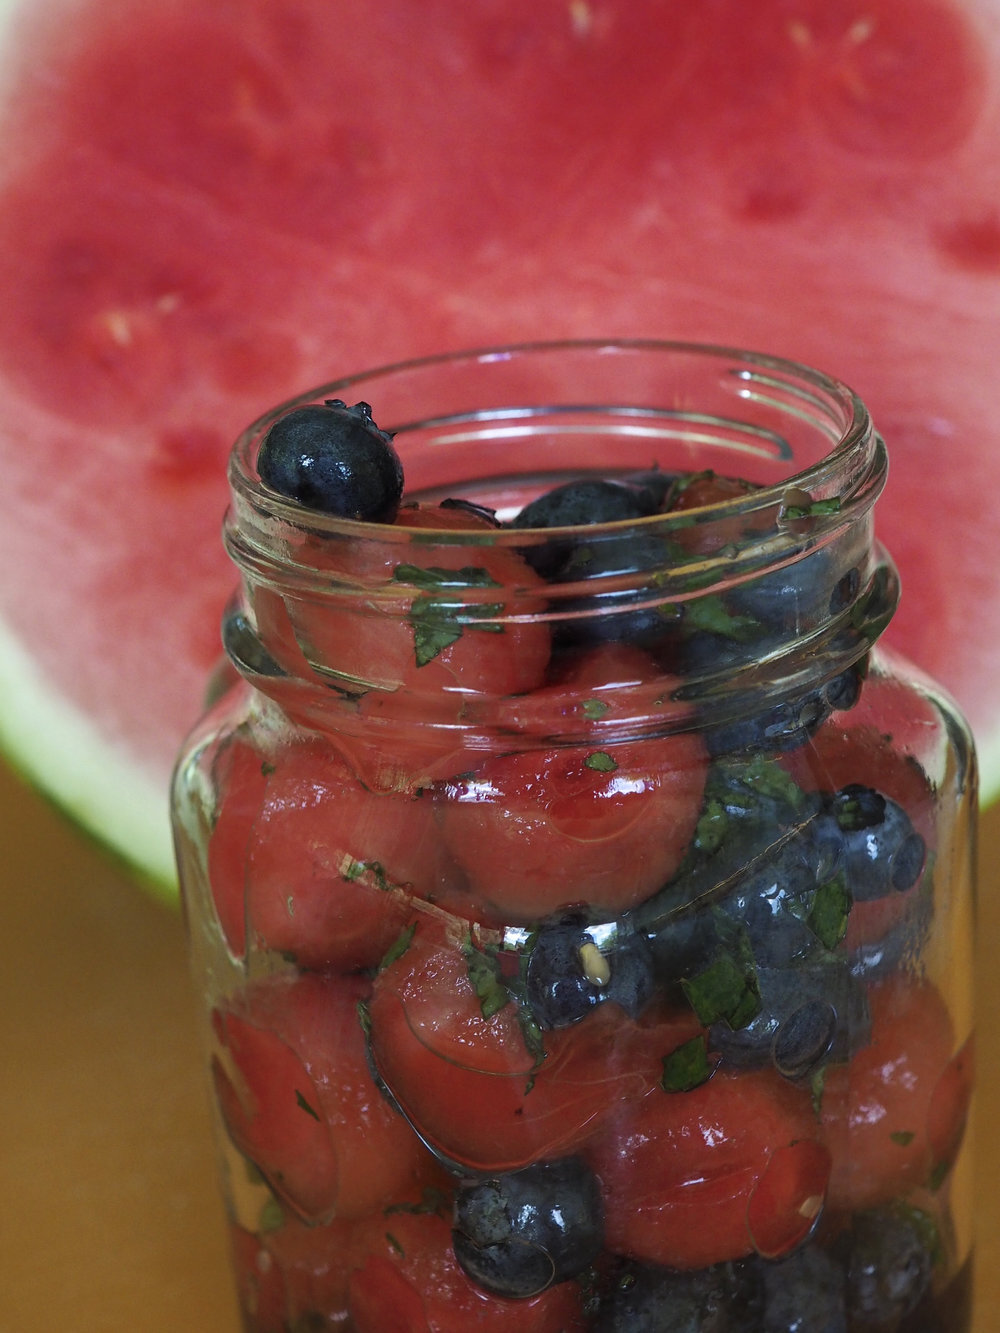 Watermelon, Blueberry, and Mint Salad in a Cup